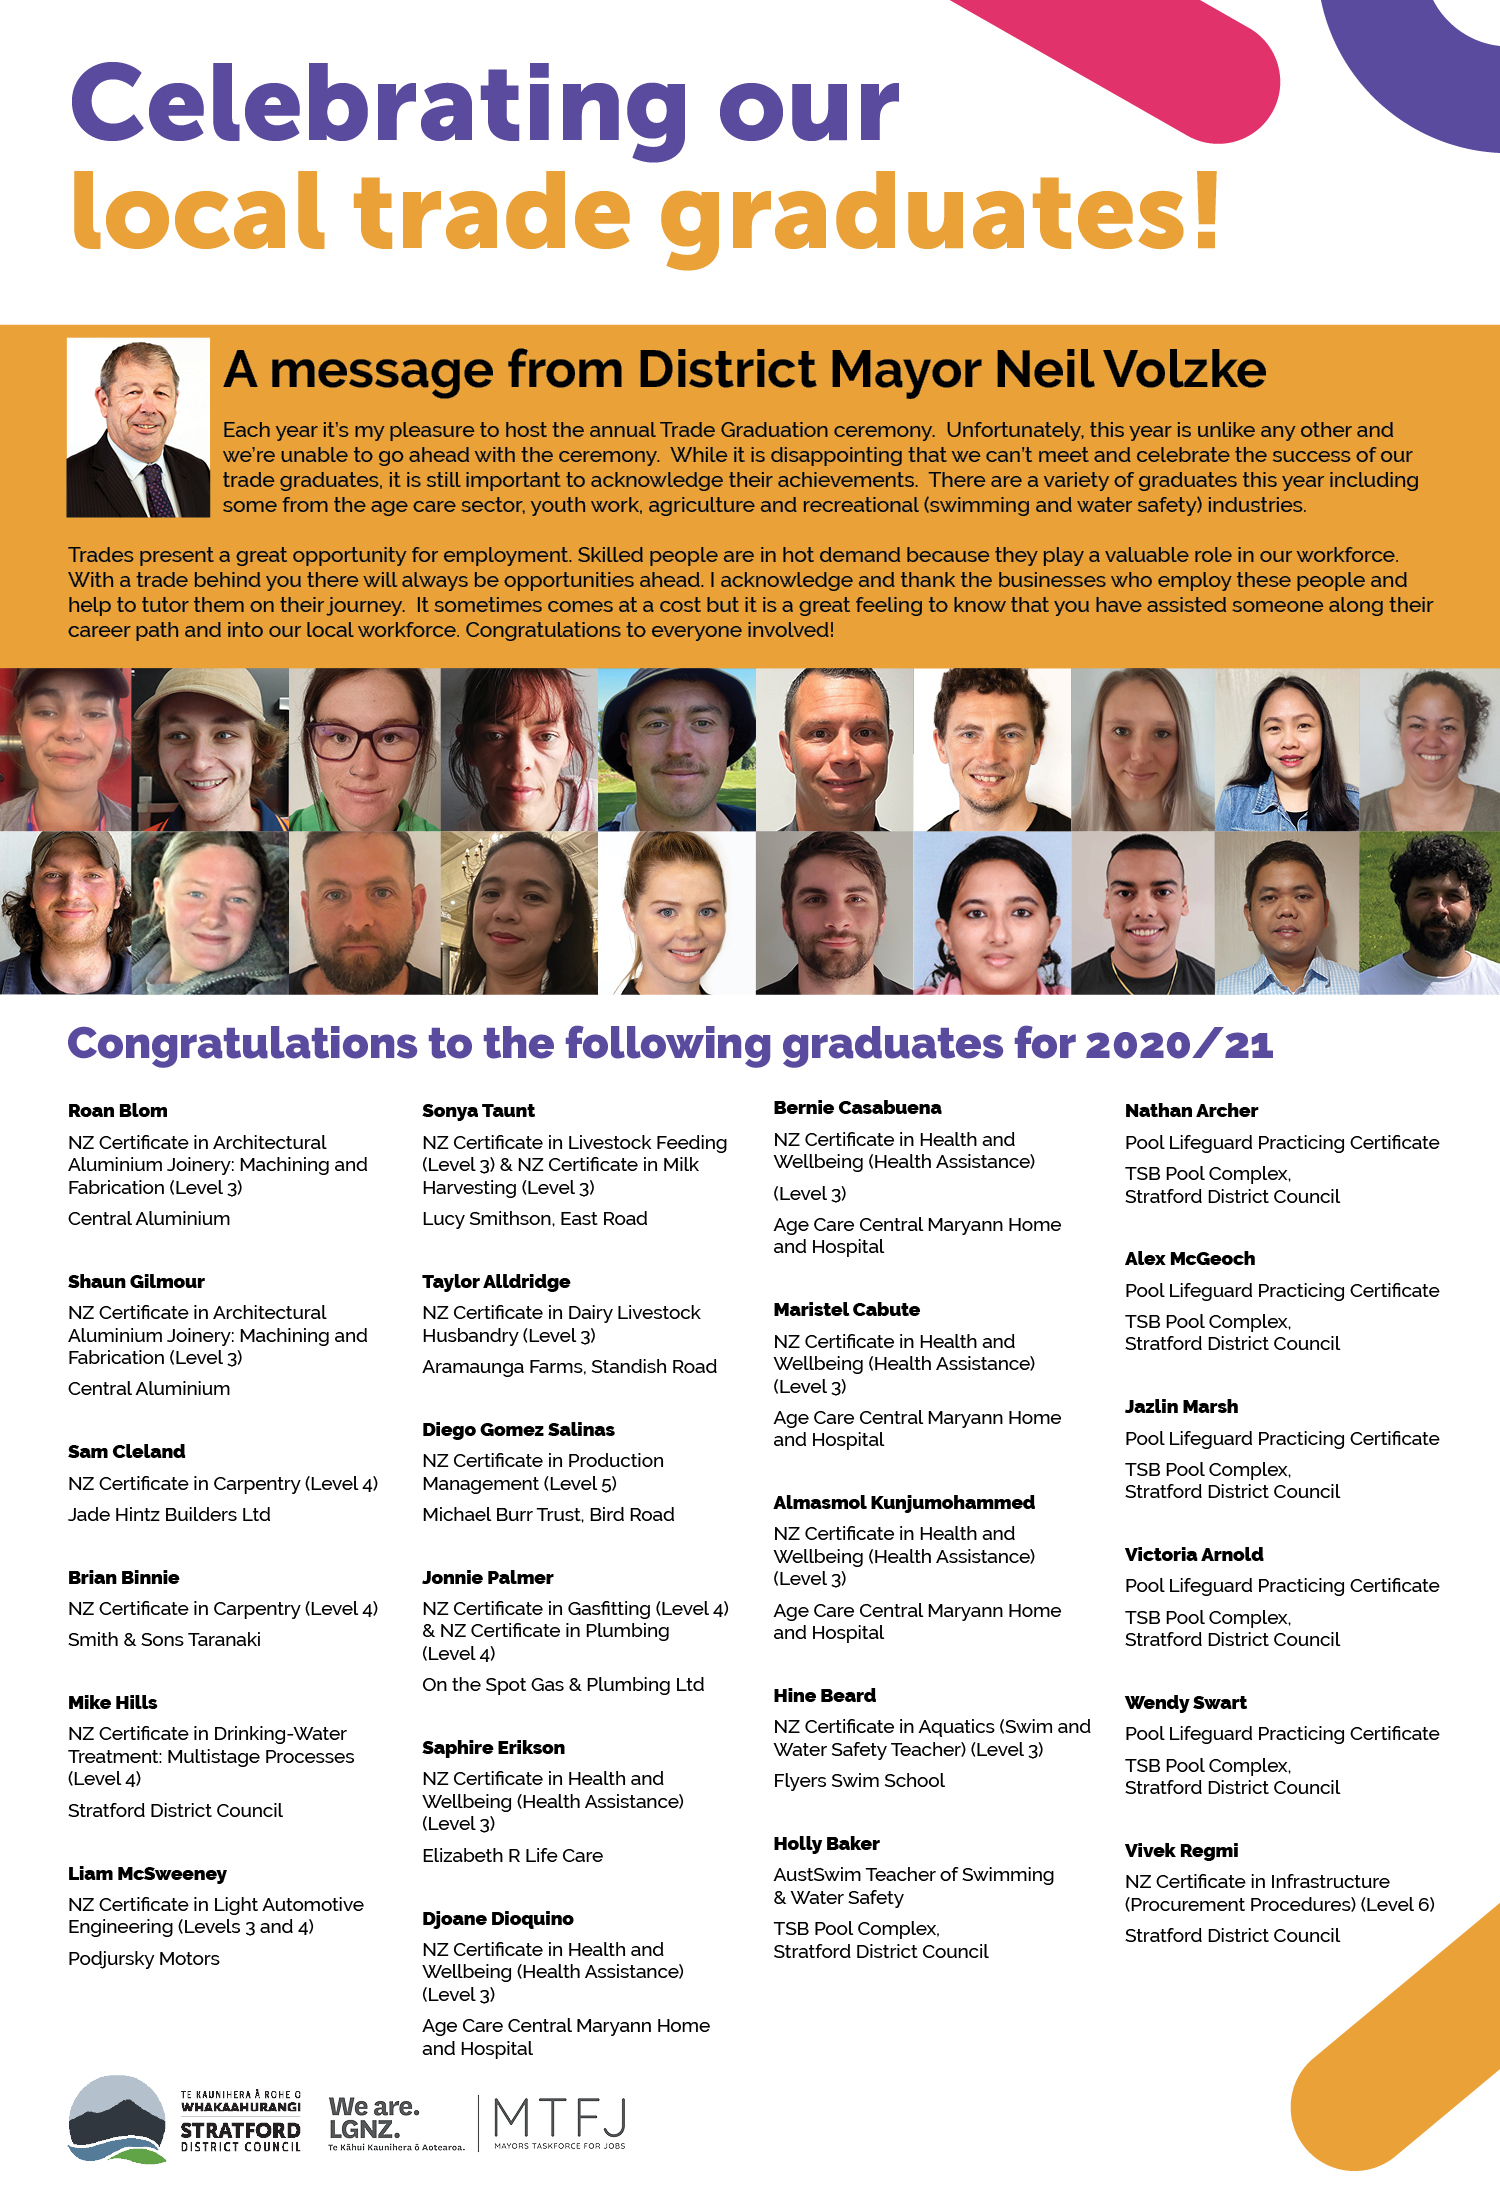 Celebrating our trade graduates - an image of graduate names and a message from the Mayor